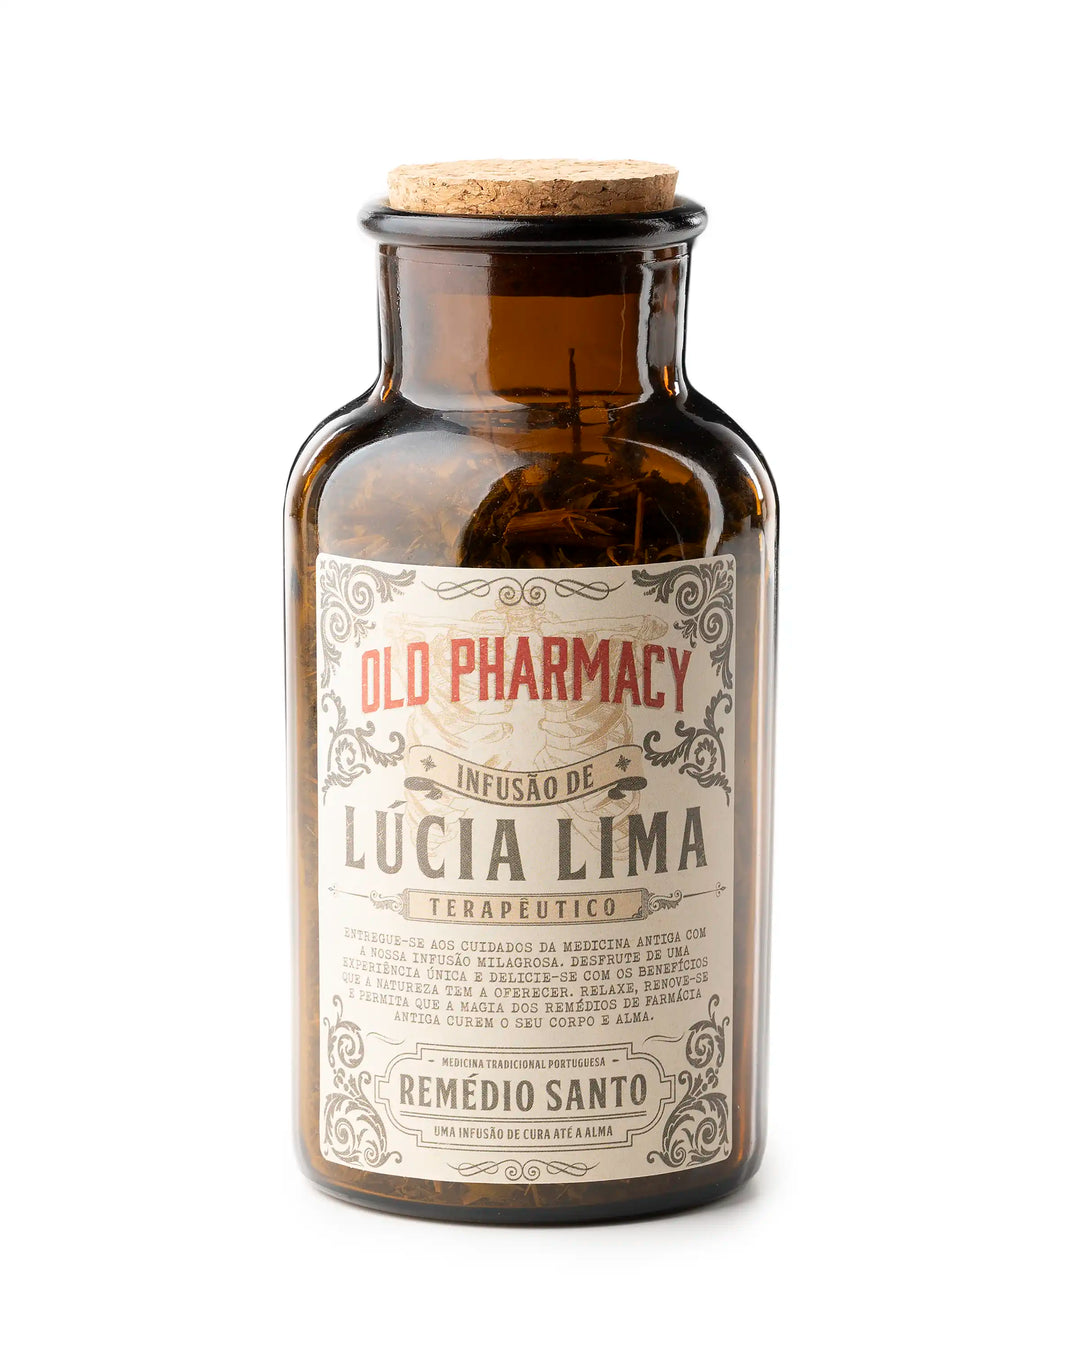 Lúcia Lima Infusion Limited Edition Old Pharmacy 40g